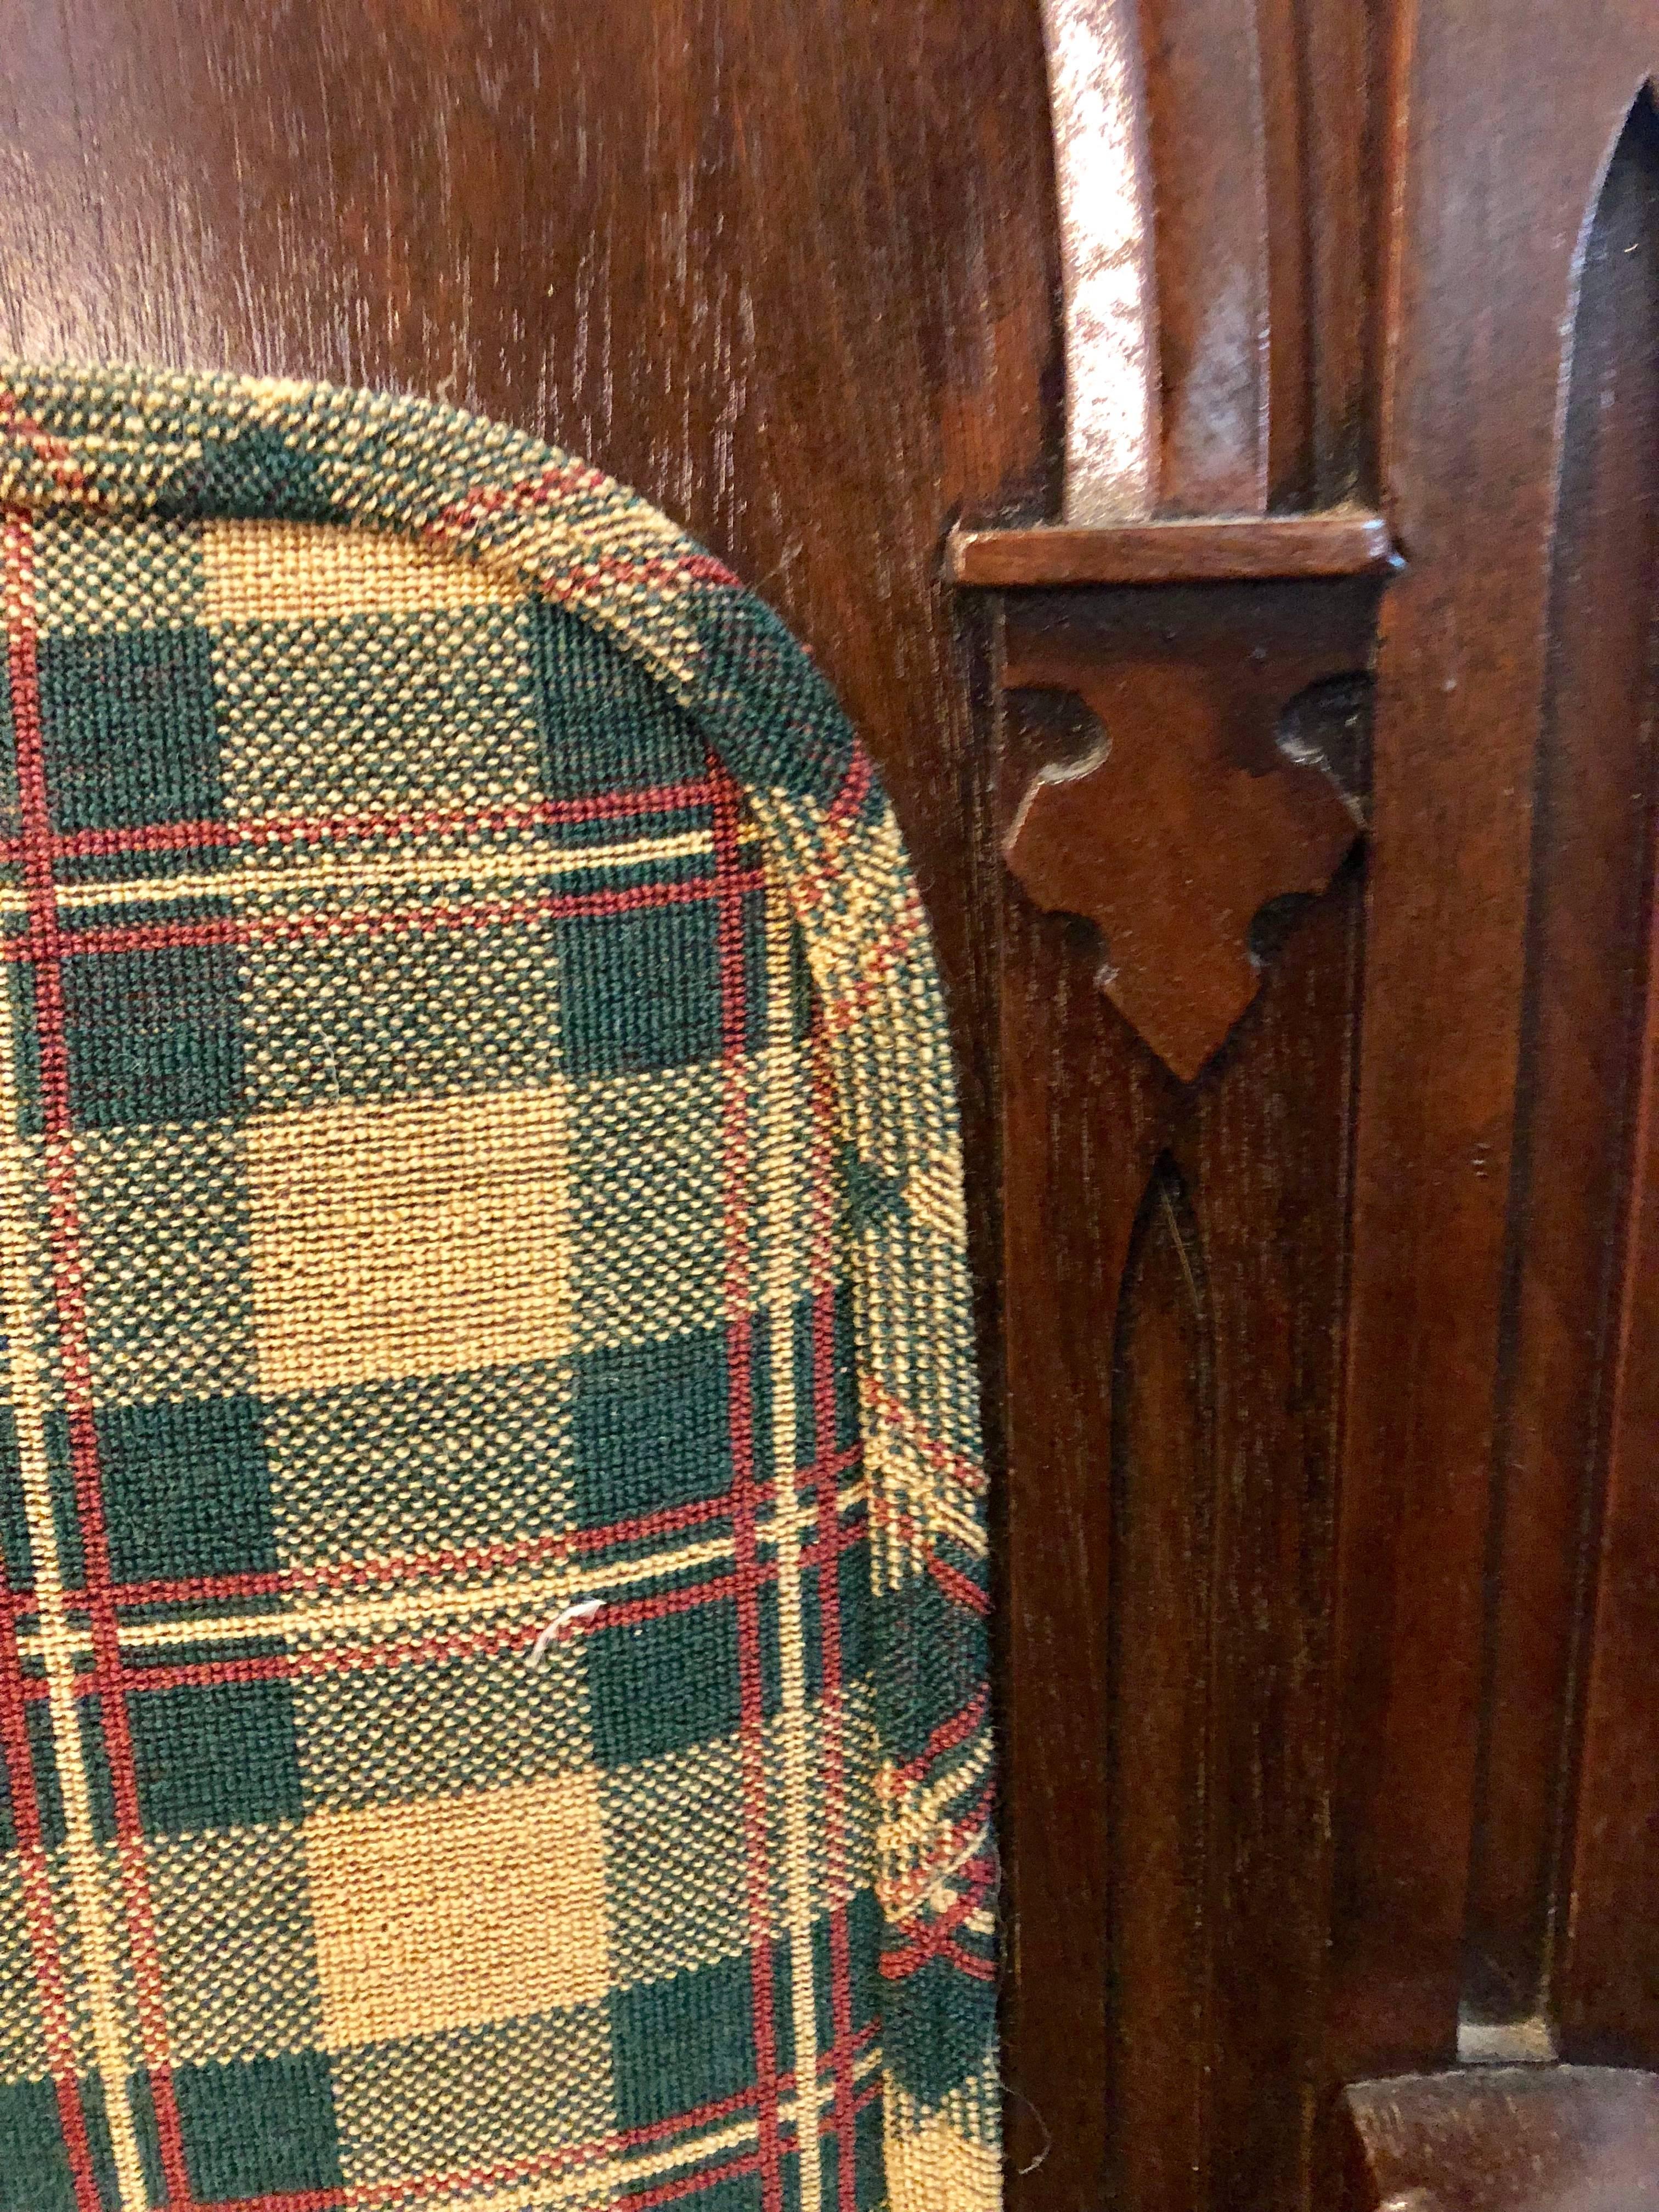 Gothic 19th Century Sofa or Hall Bench in an Irish Plaid Upholstery 2